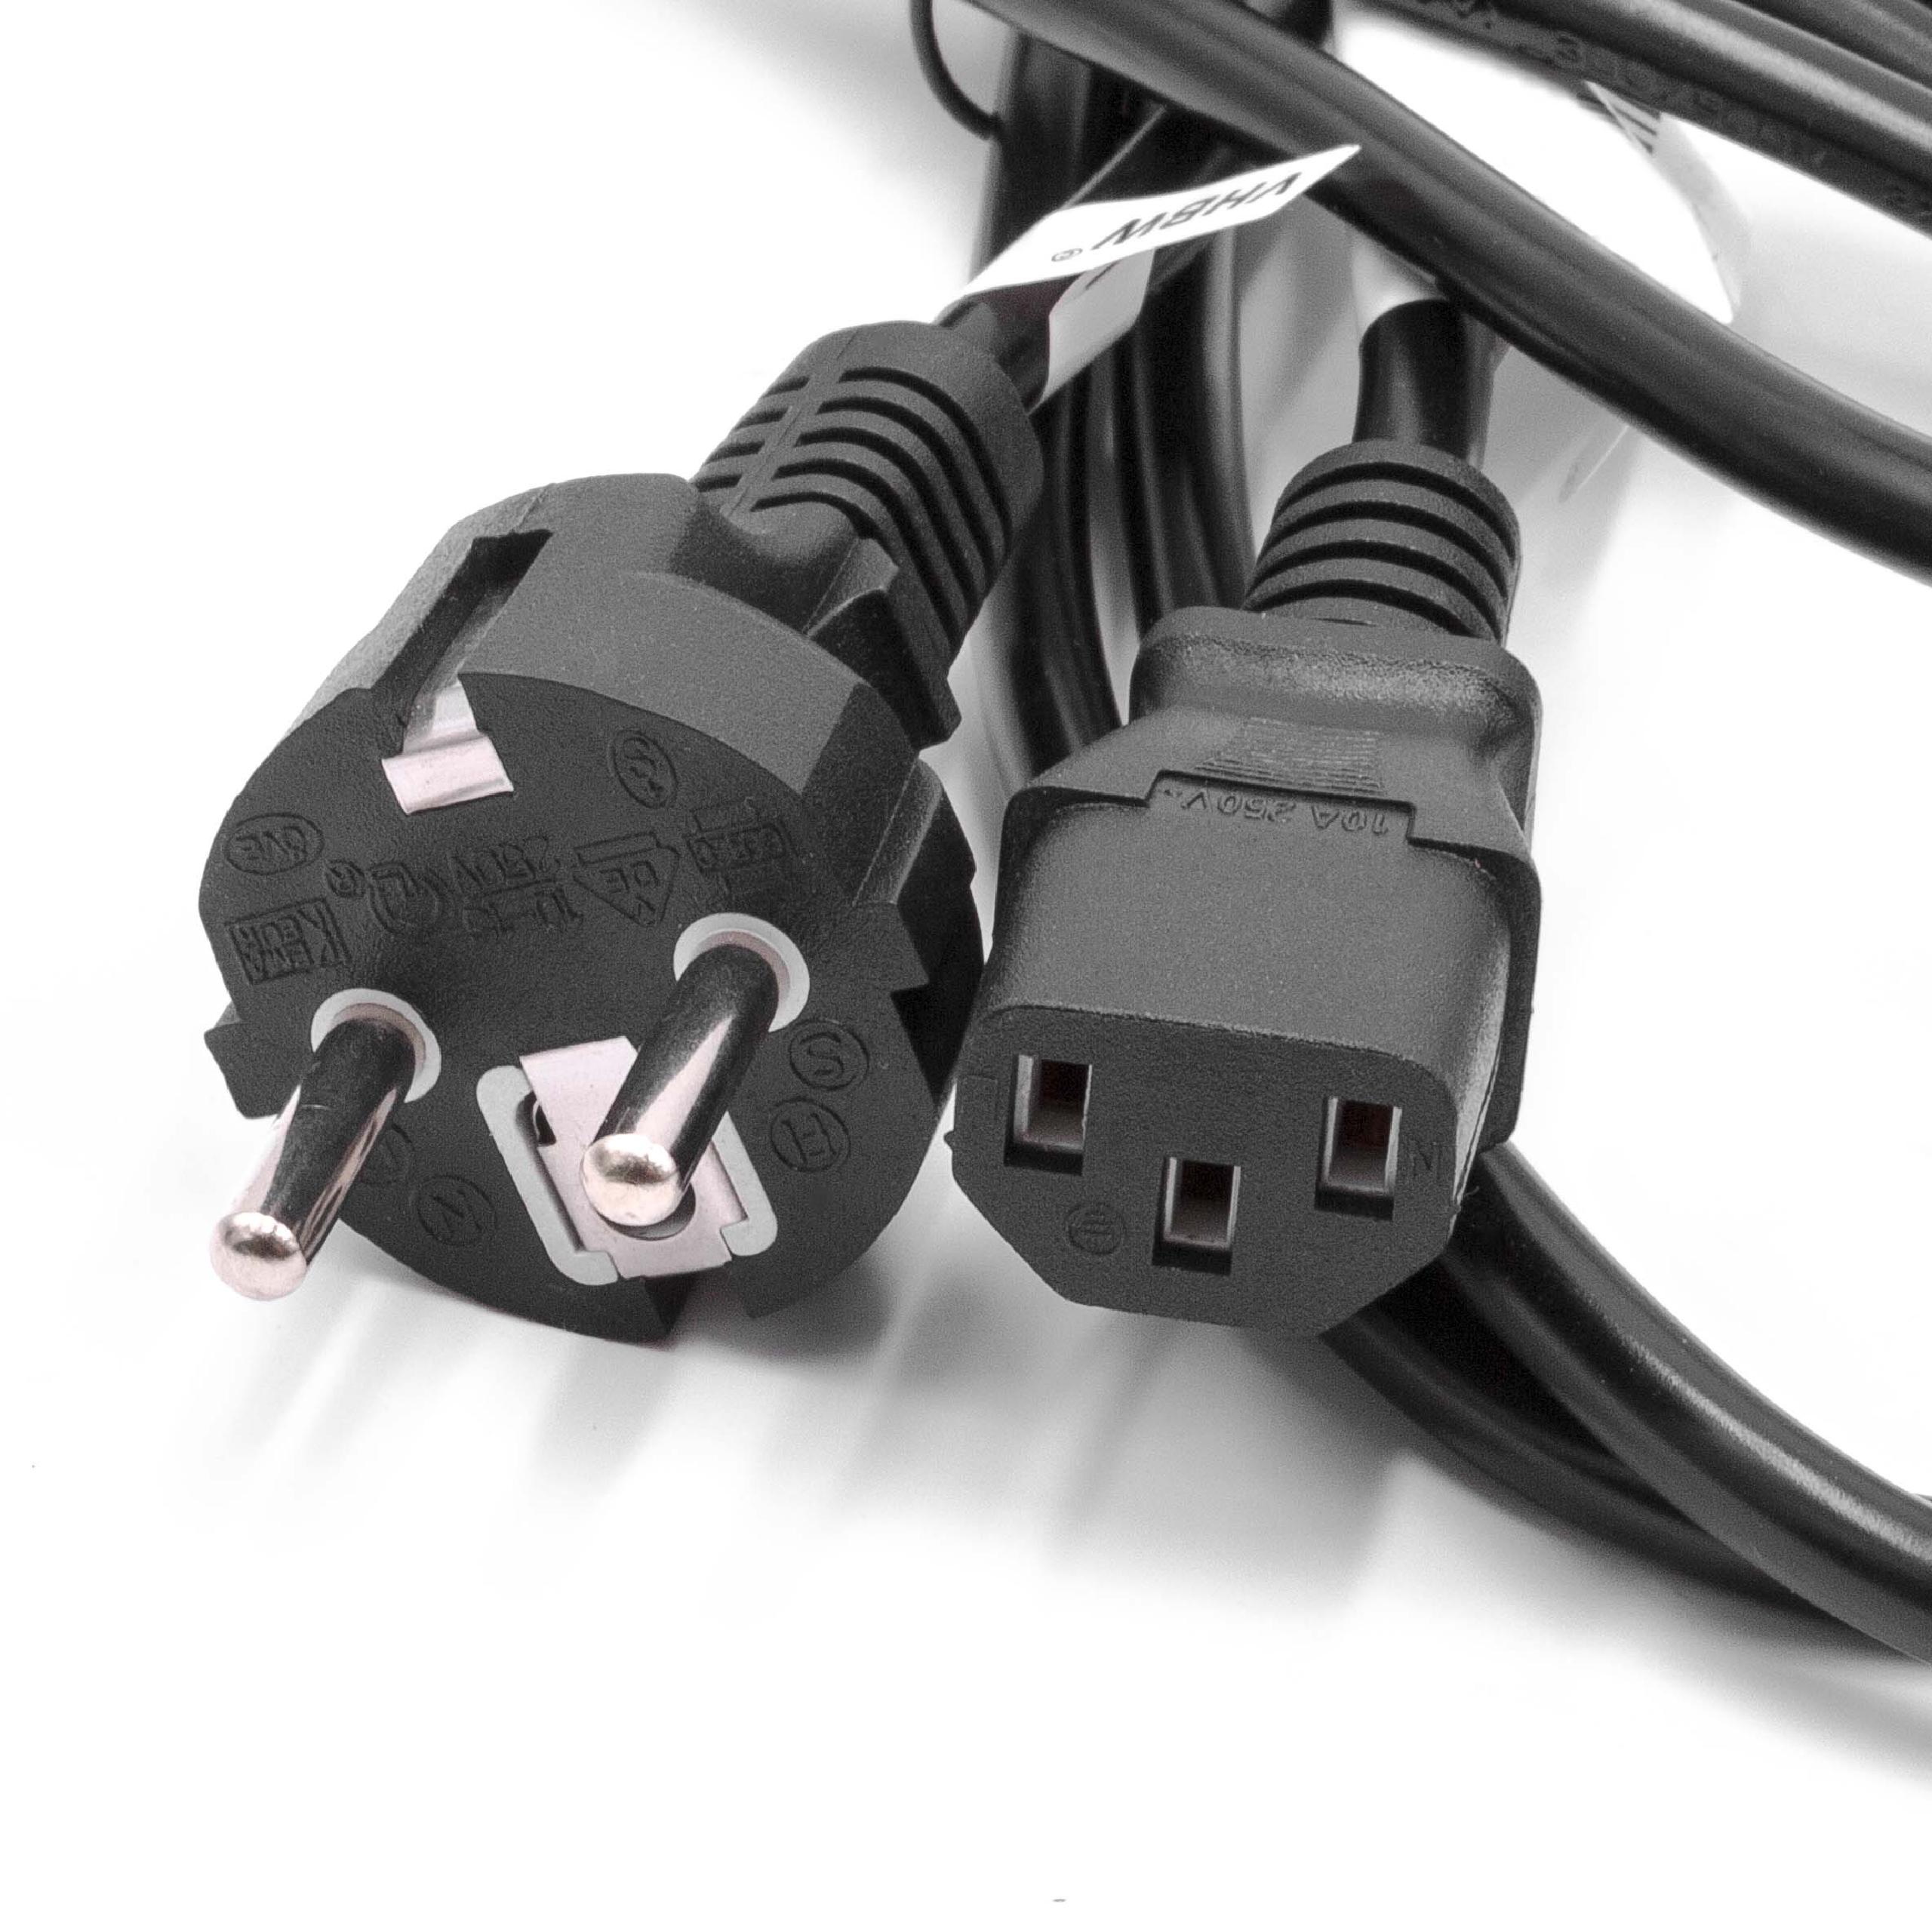 5x C13 Power Cable Euro Plug suitable for Devices e.g. PC Monitor Computer - 2 m